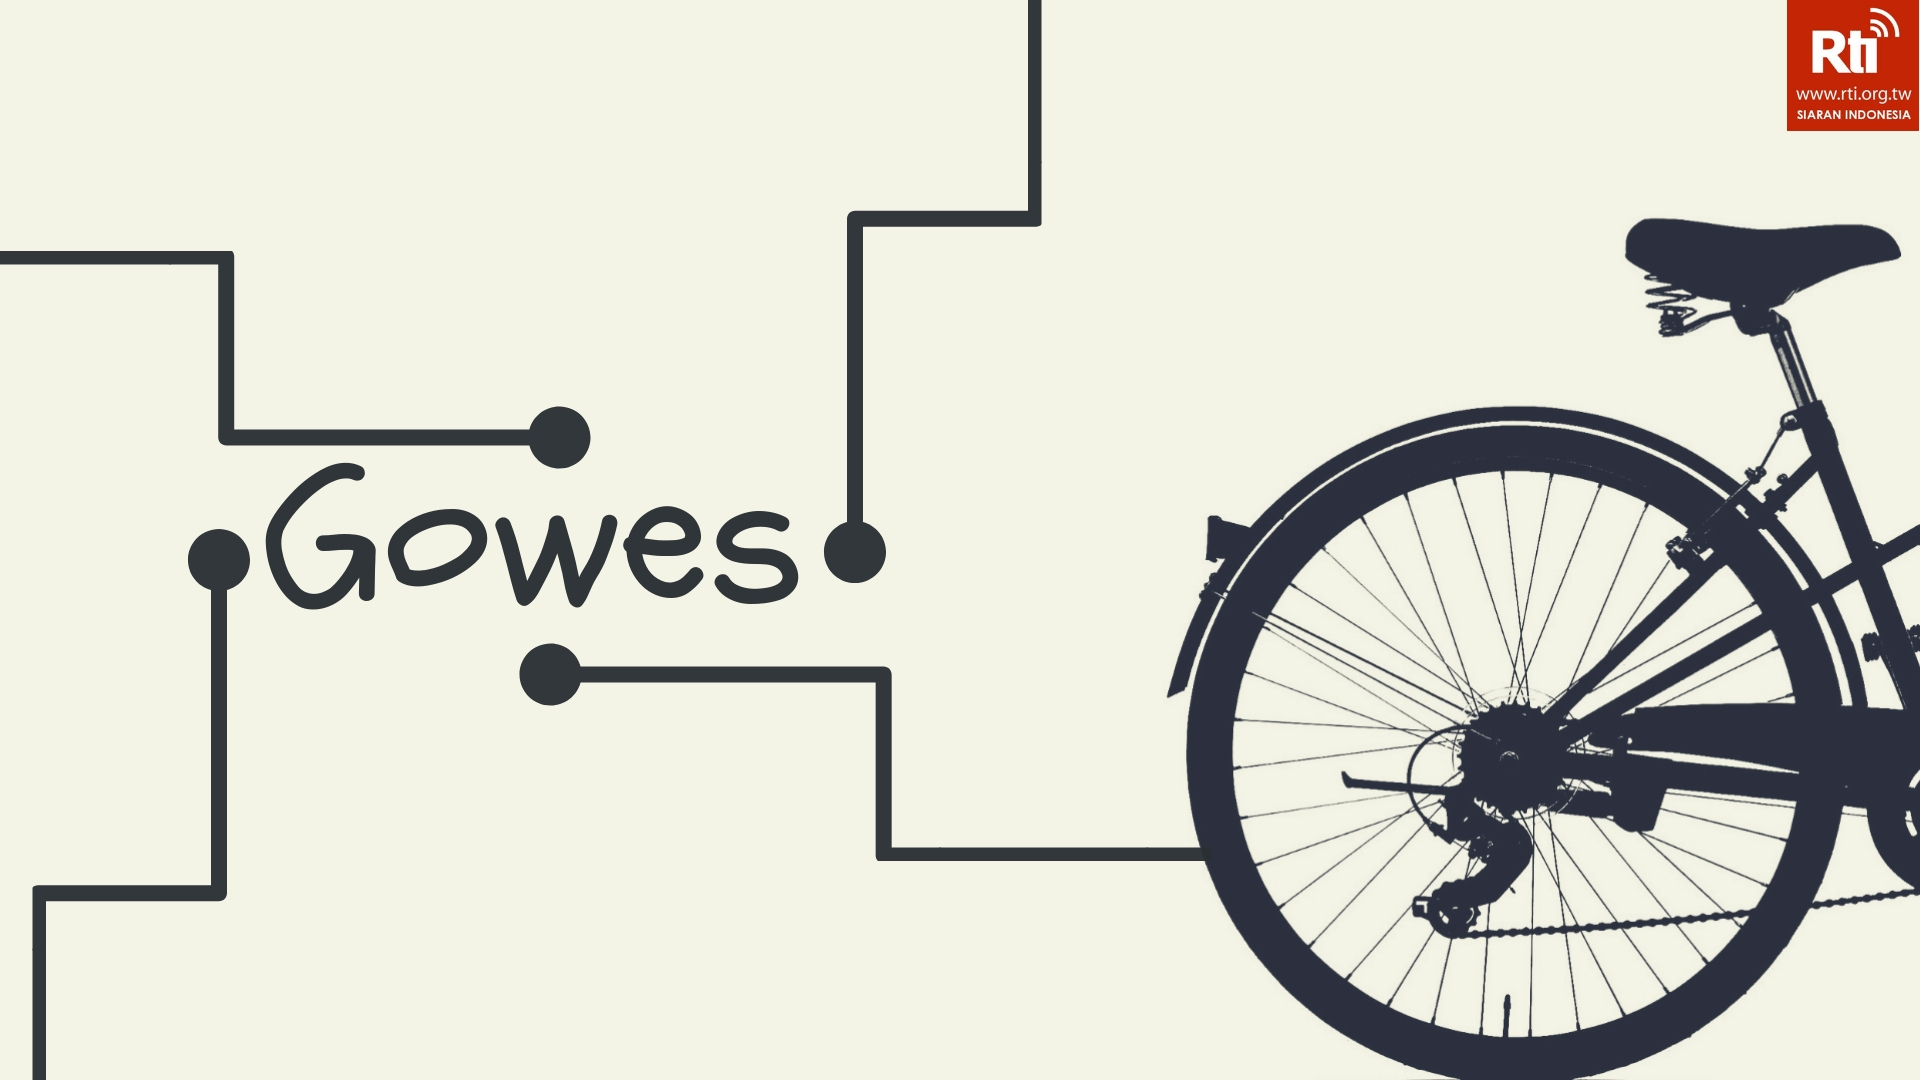 Gowes - 2021-11-26